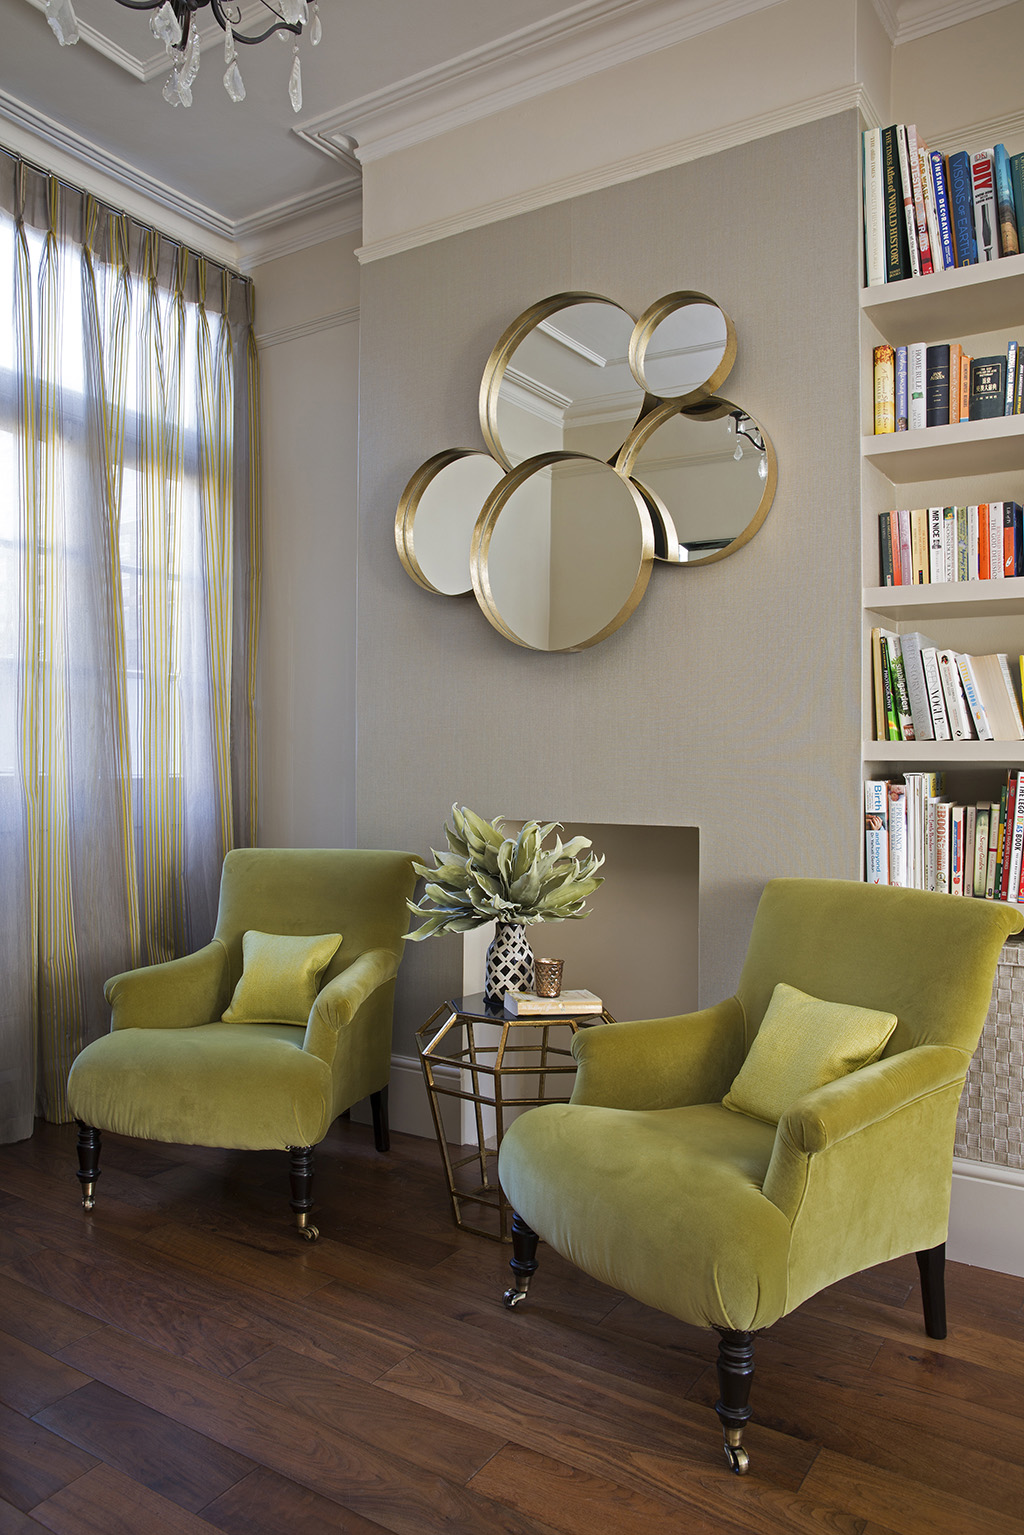 Reading room designed by Emma Green